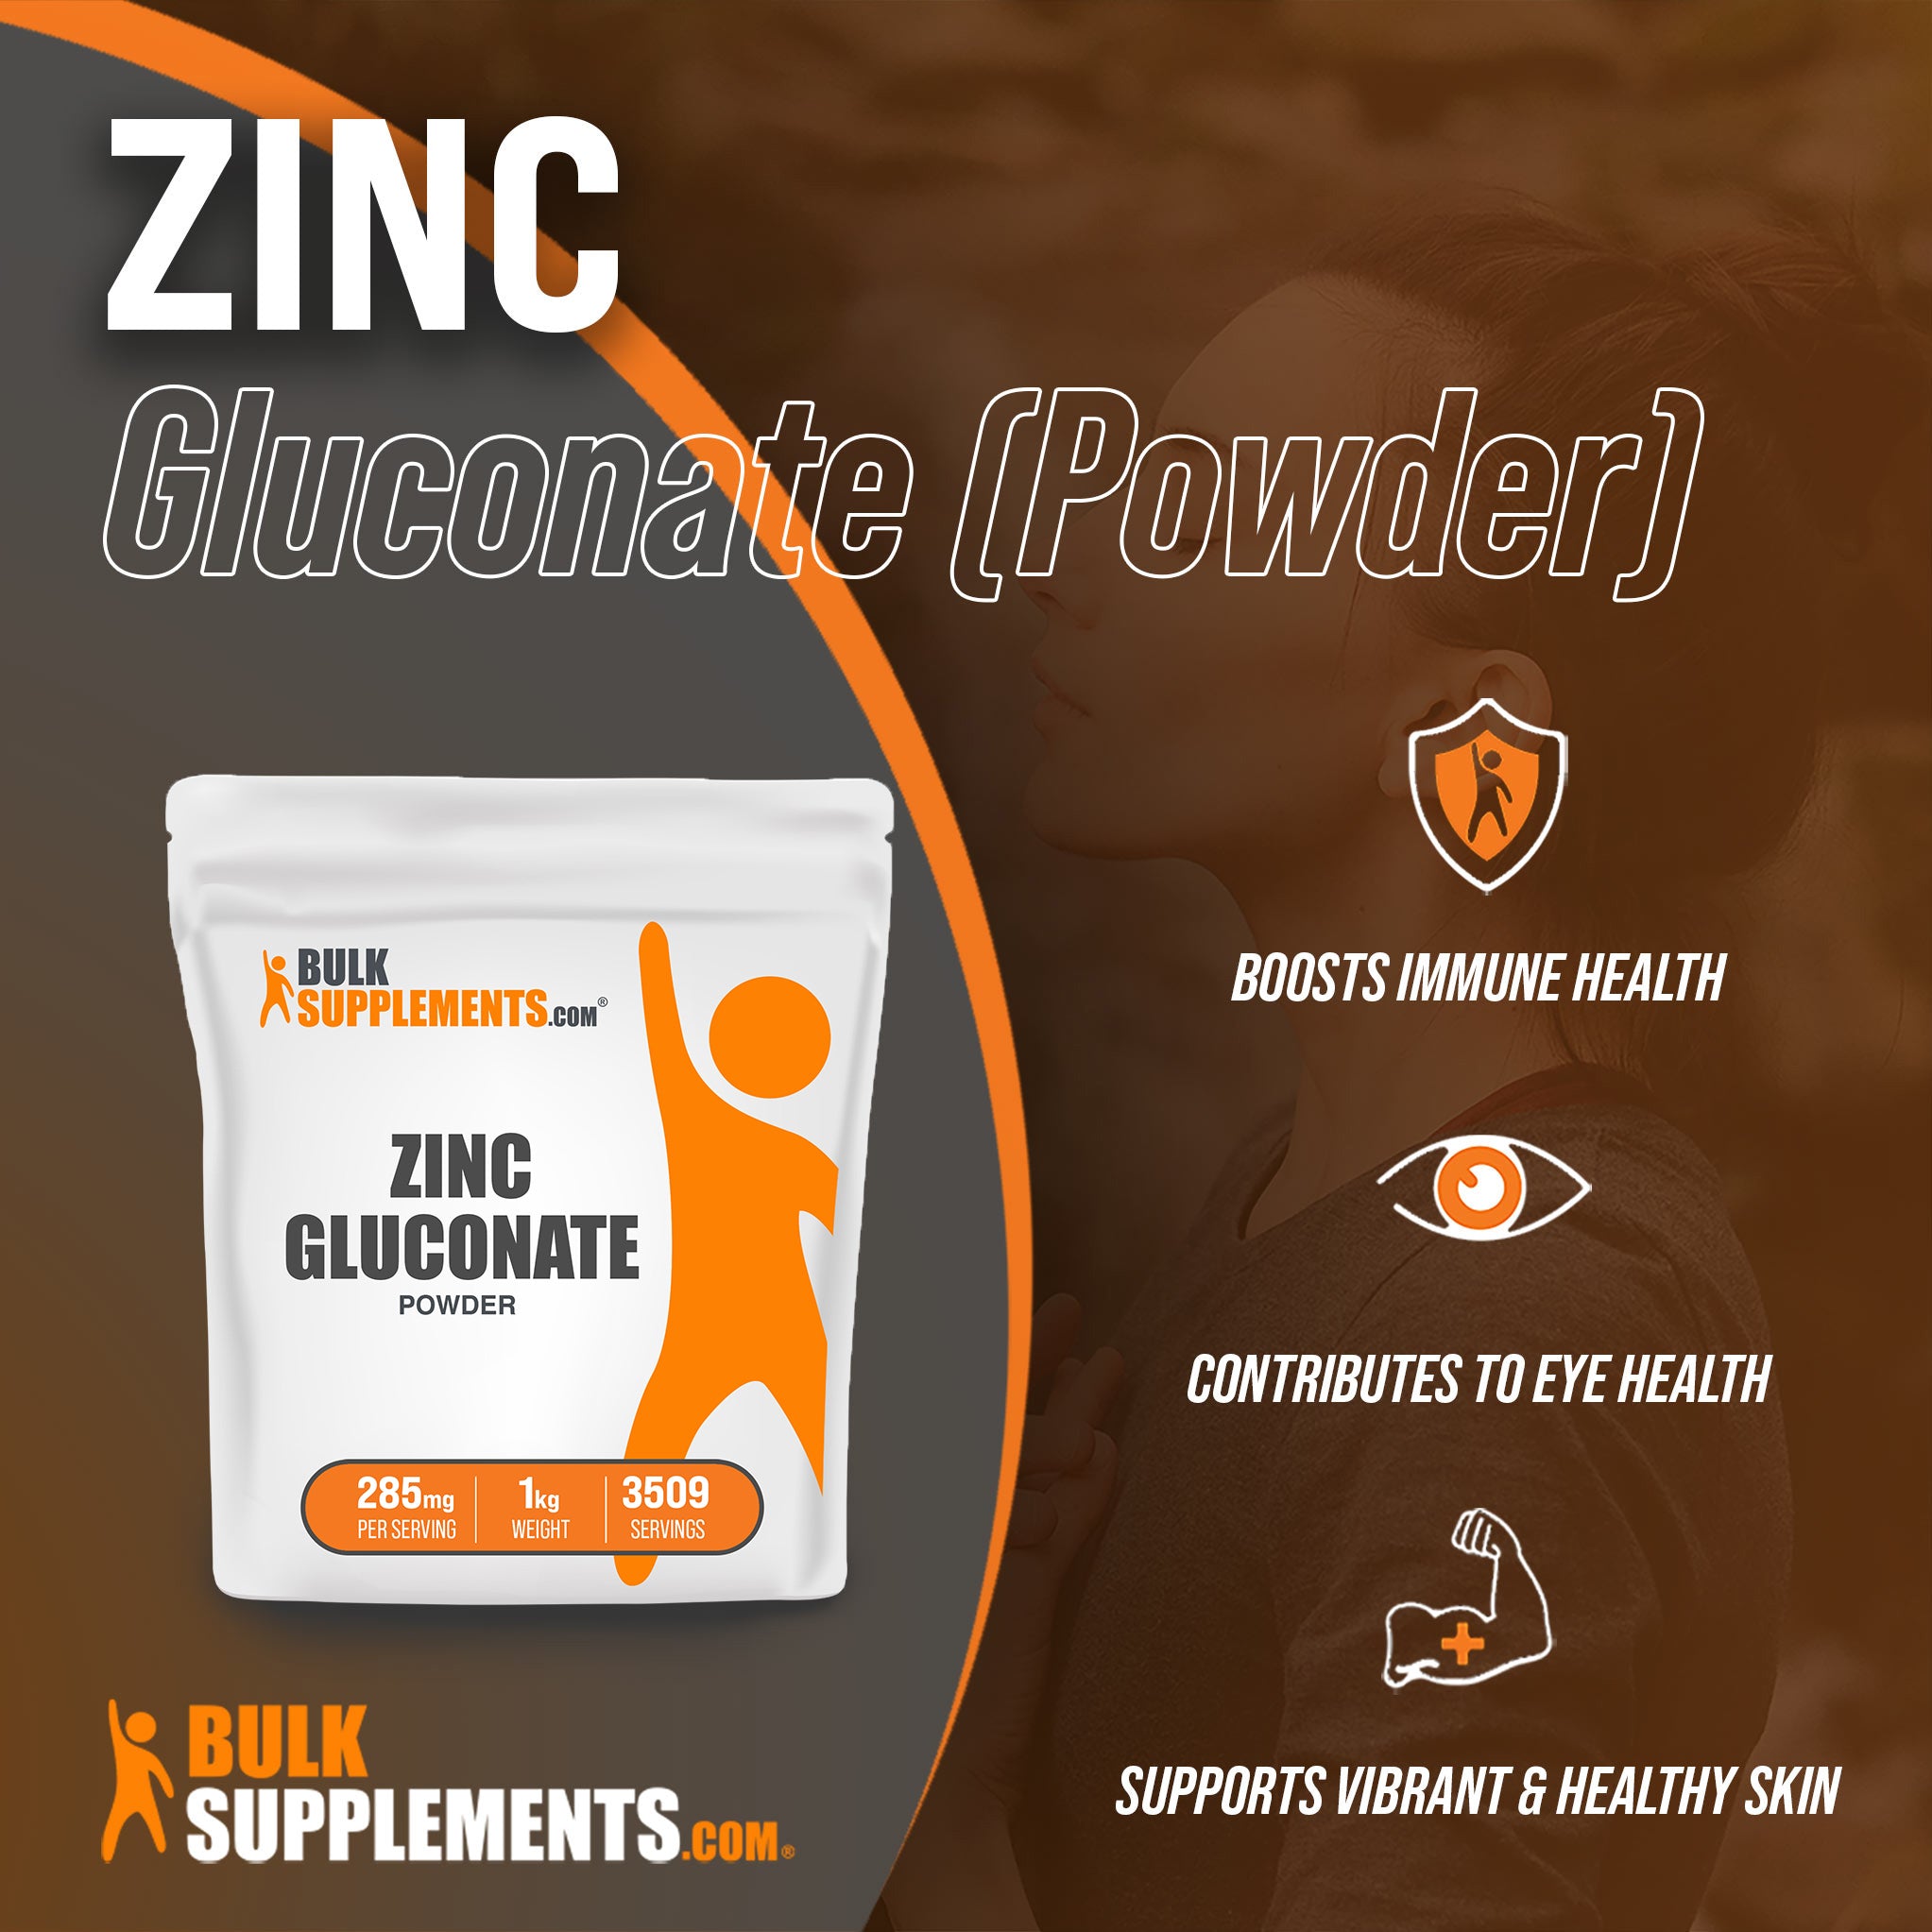 Benefits of Zinc Gluconate: boosts immune health, contributes to eye health, supports vibrant and healthy skin